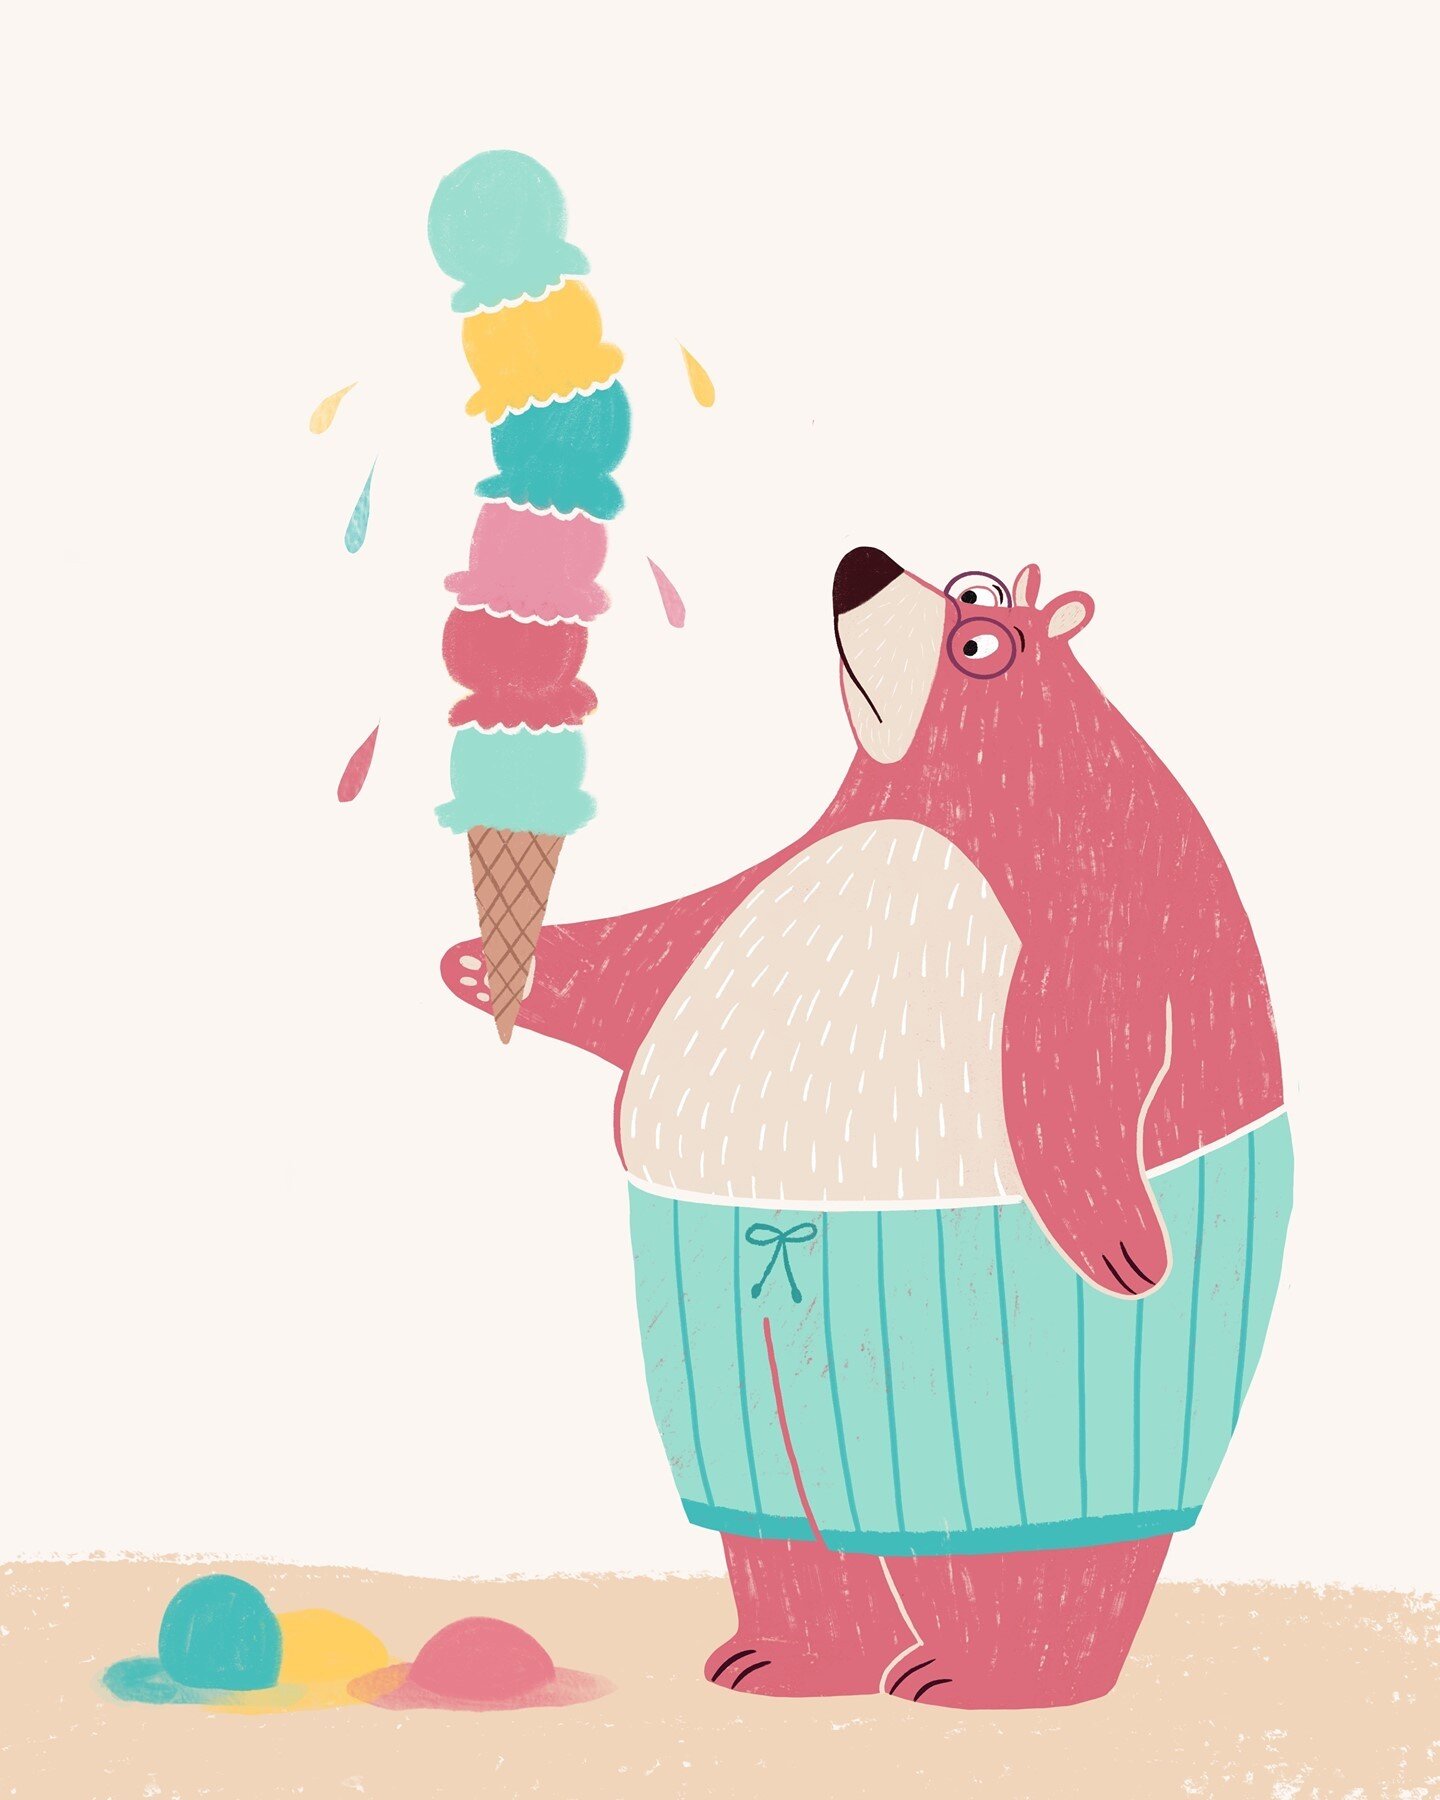 Everytime I think the weather is going to turn into sunshine it starts raining again! 😆  Though who says you can't enjoy ice cream in the rain 🍦 🌧 ⁠
.⁠
.⁠
.⁠
.⁠
.⁠
.⁠
.⁠
.⁠
.⁠
.⁠
#childrenswriterguild #kidsbookillustrator #illustrationsforchildren